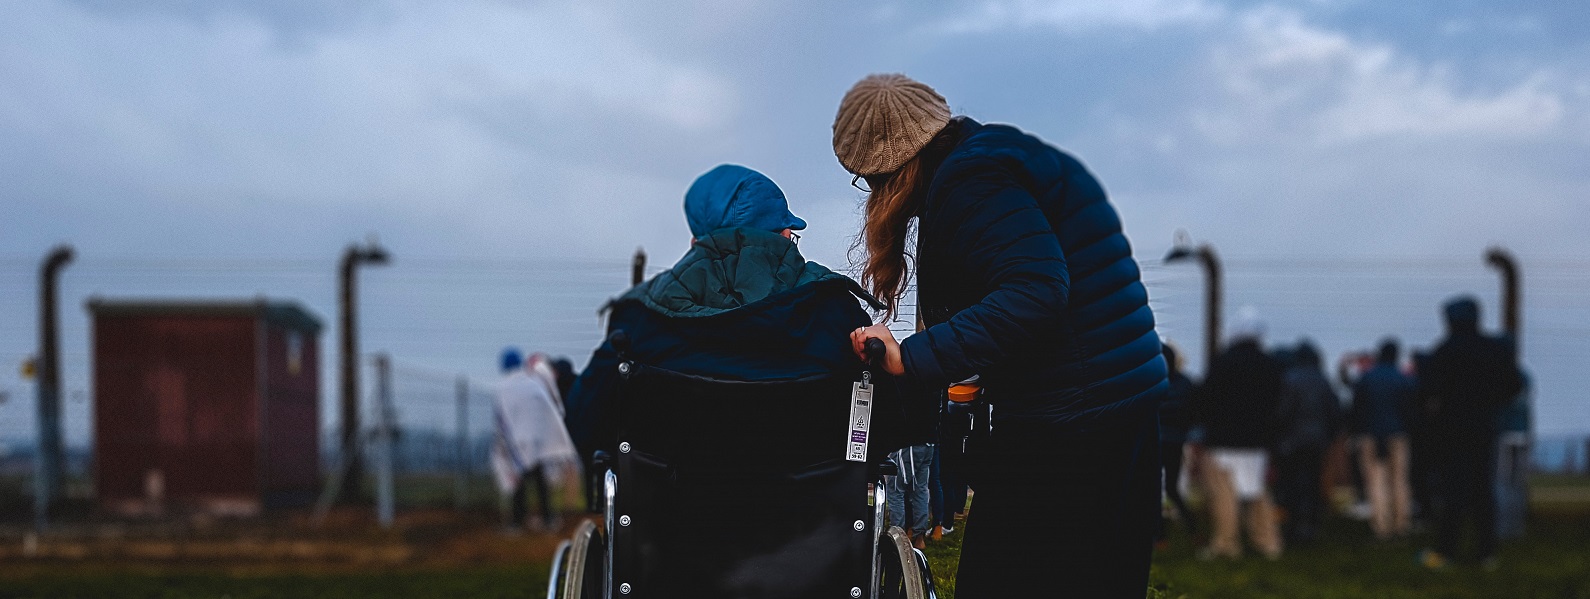 Disability-photo_by_Josh_Appel-Unsplash-cropped